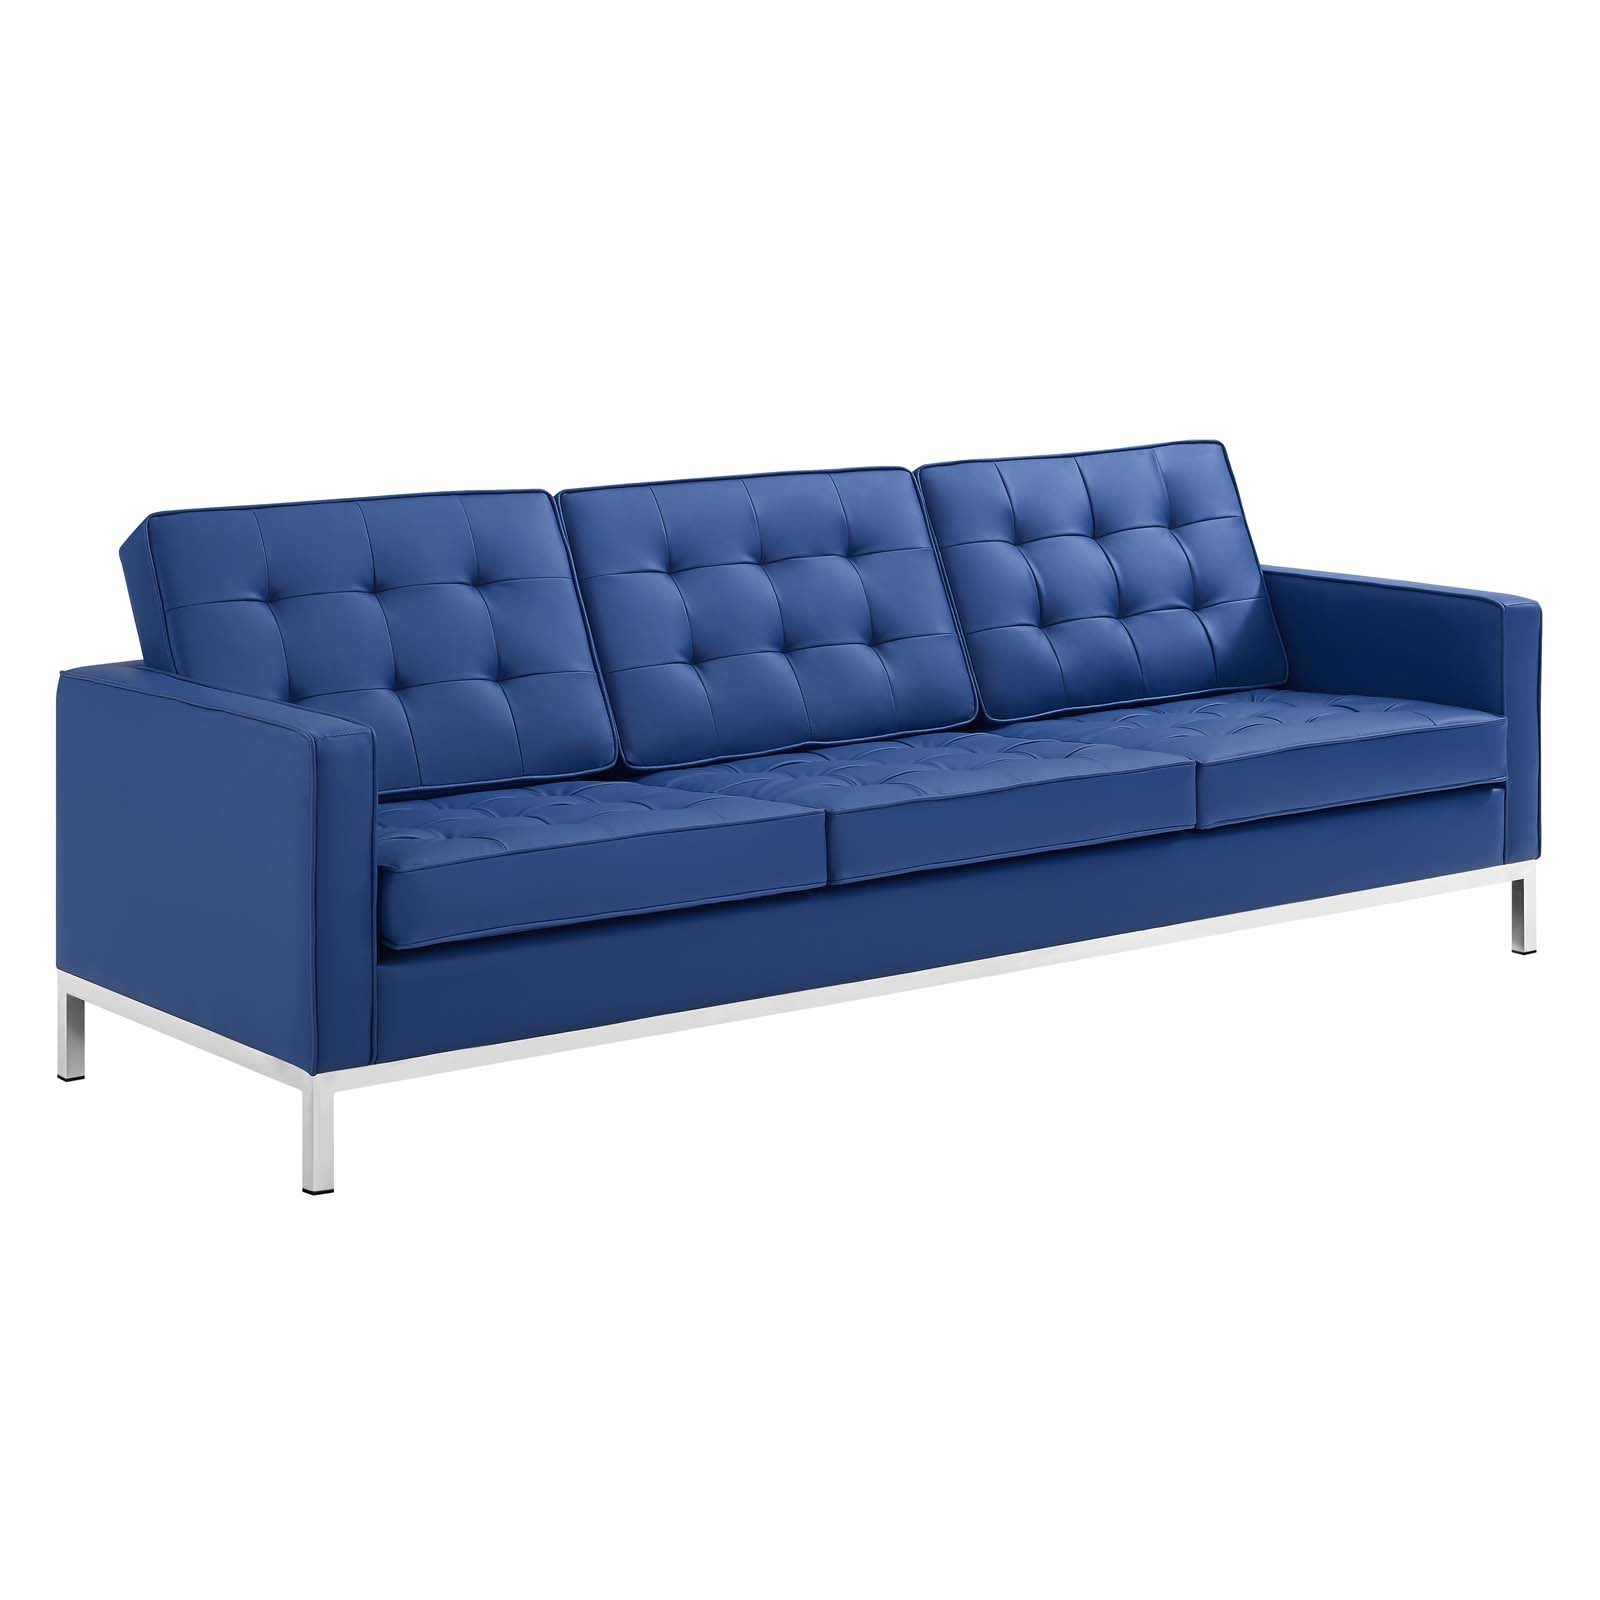 Loft Tufted Upholstered Faux Leather Sofa - East Shore Modern Home Furnishings